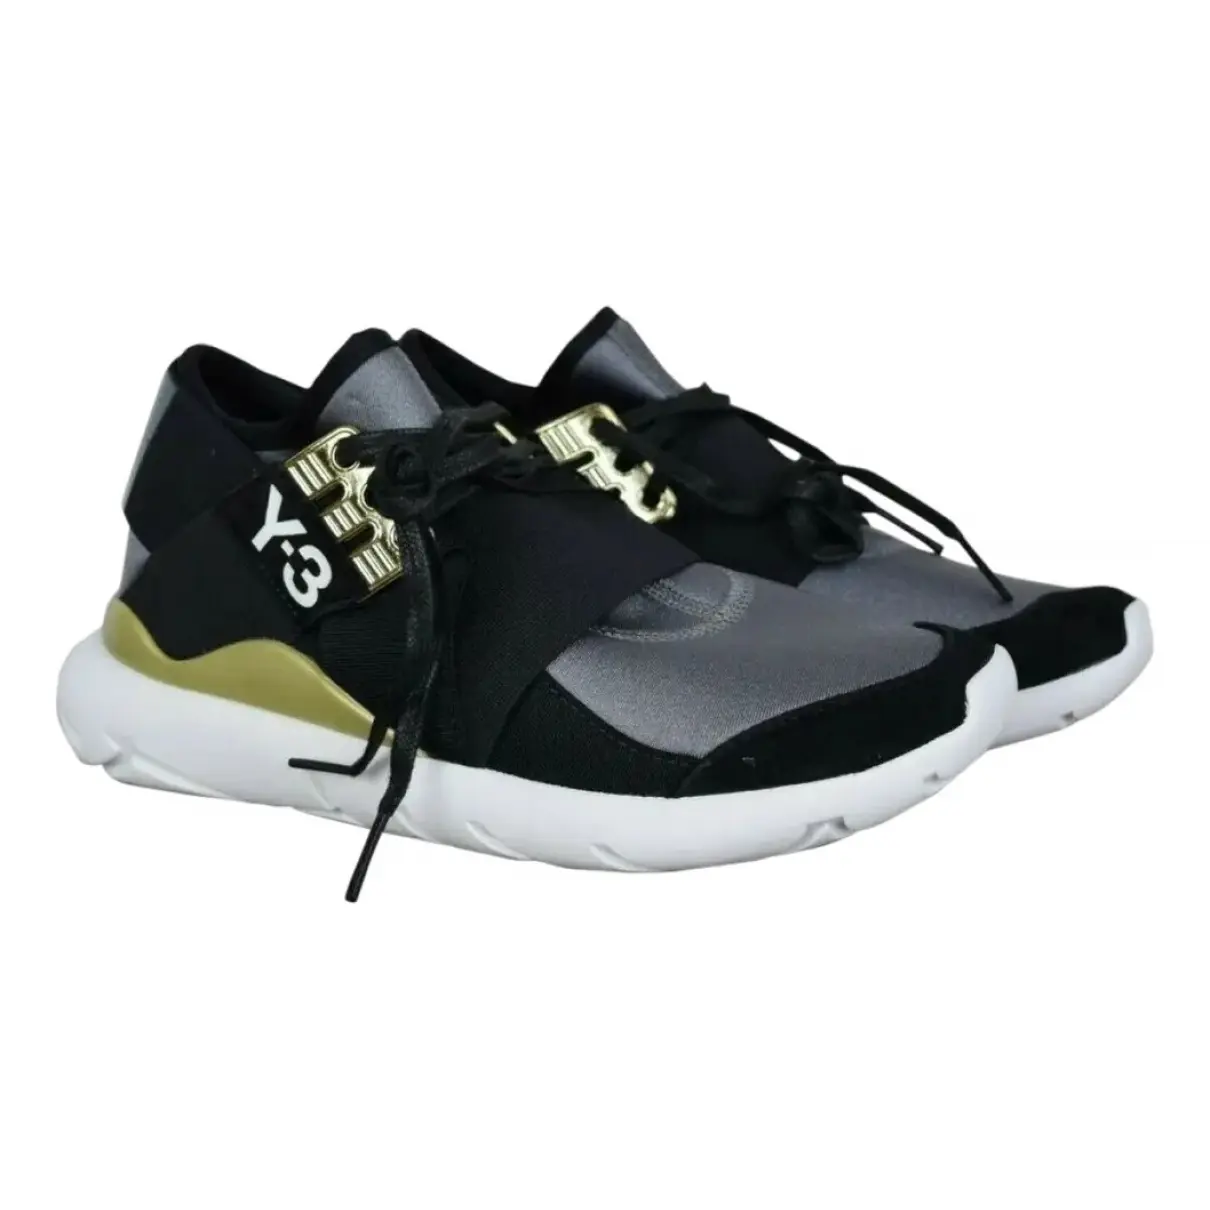 Leather trainers Y-3